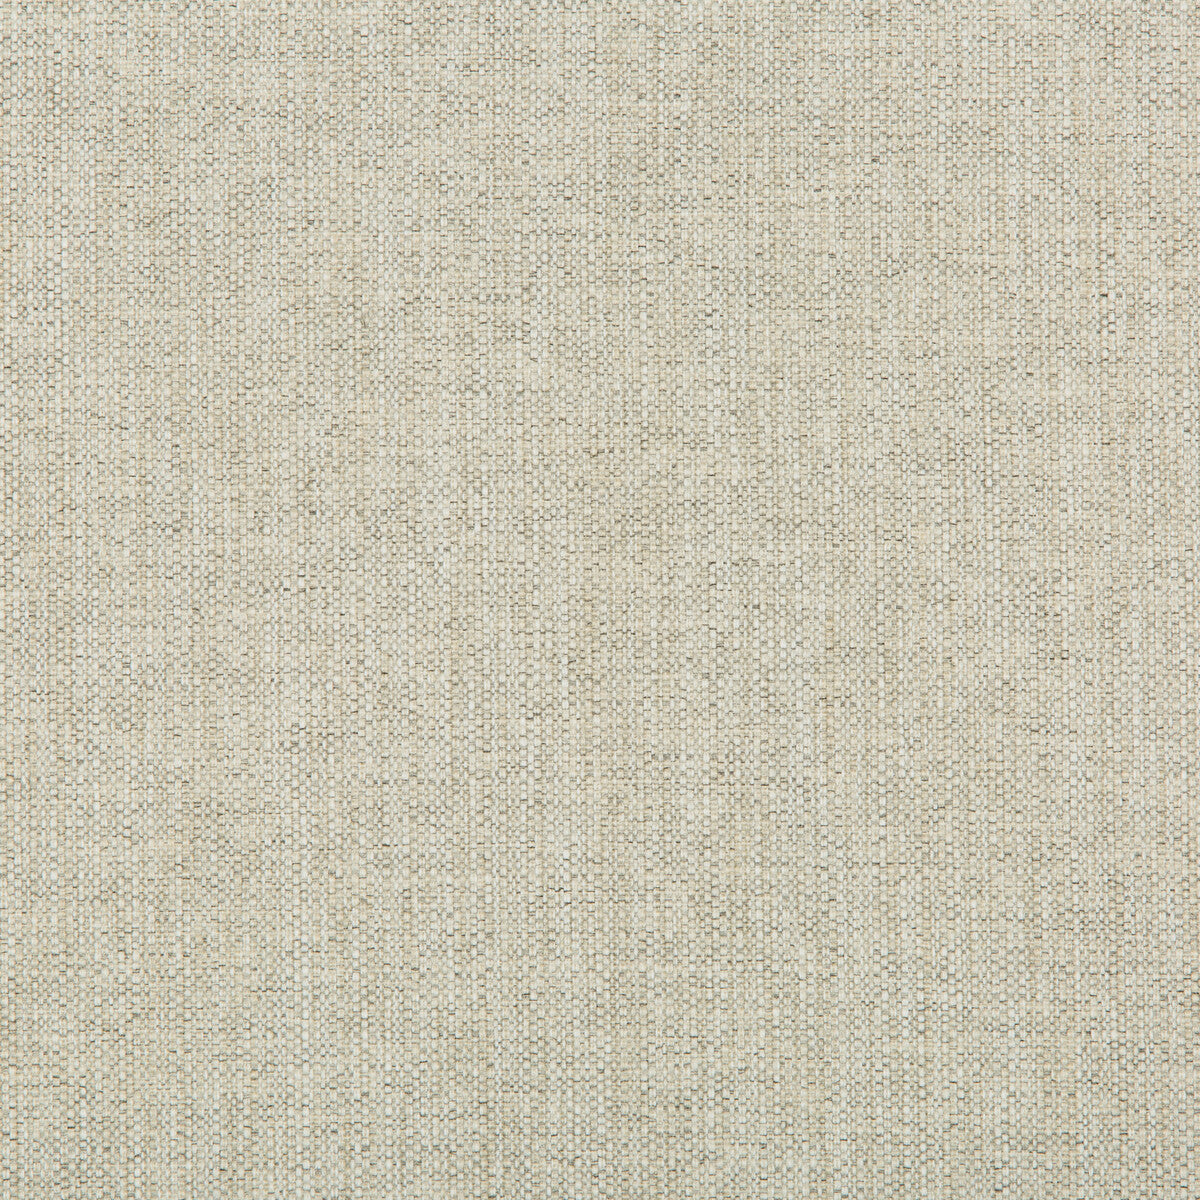 Kravet Contract fabric in 35443-111 color - pattern 35443.111.0 - by Kravet Contract